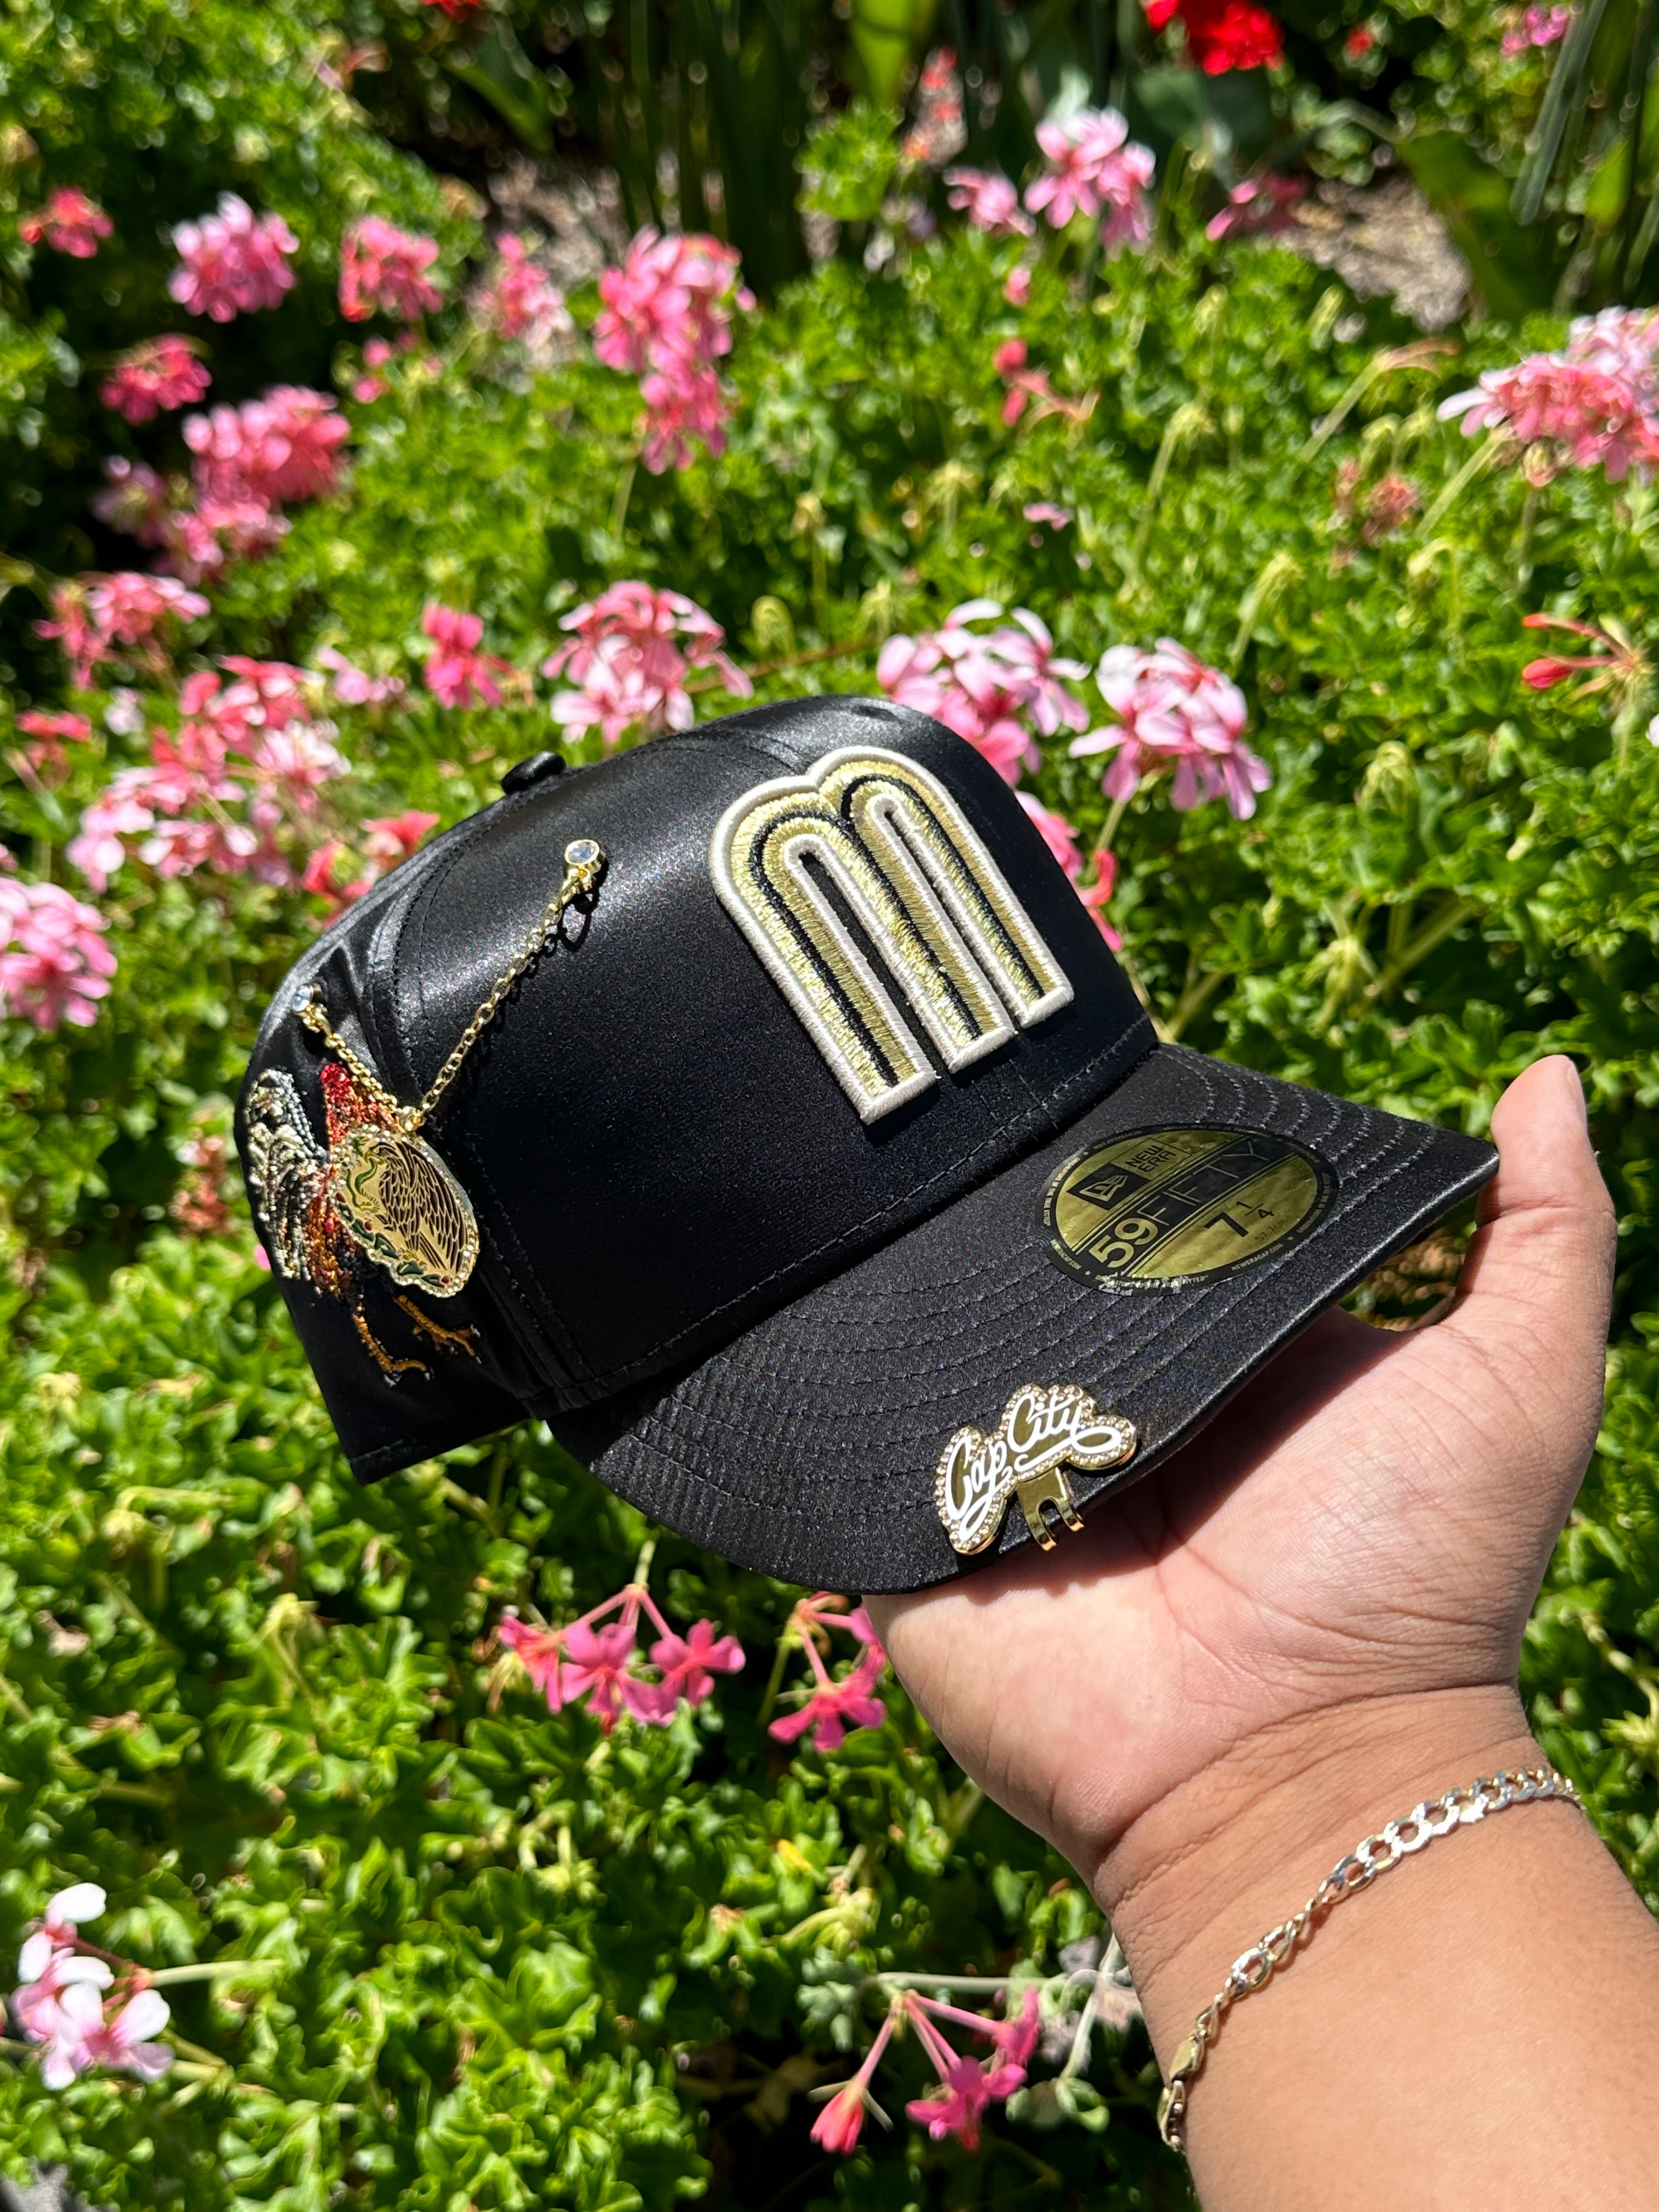 NEW ERA EXCLUSIVE 59FIFTY BLACK SATIN MEXICO W/ EL GALLO SIDEPATCH + MEXICO FLAG PATCH